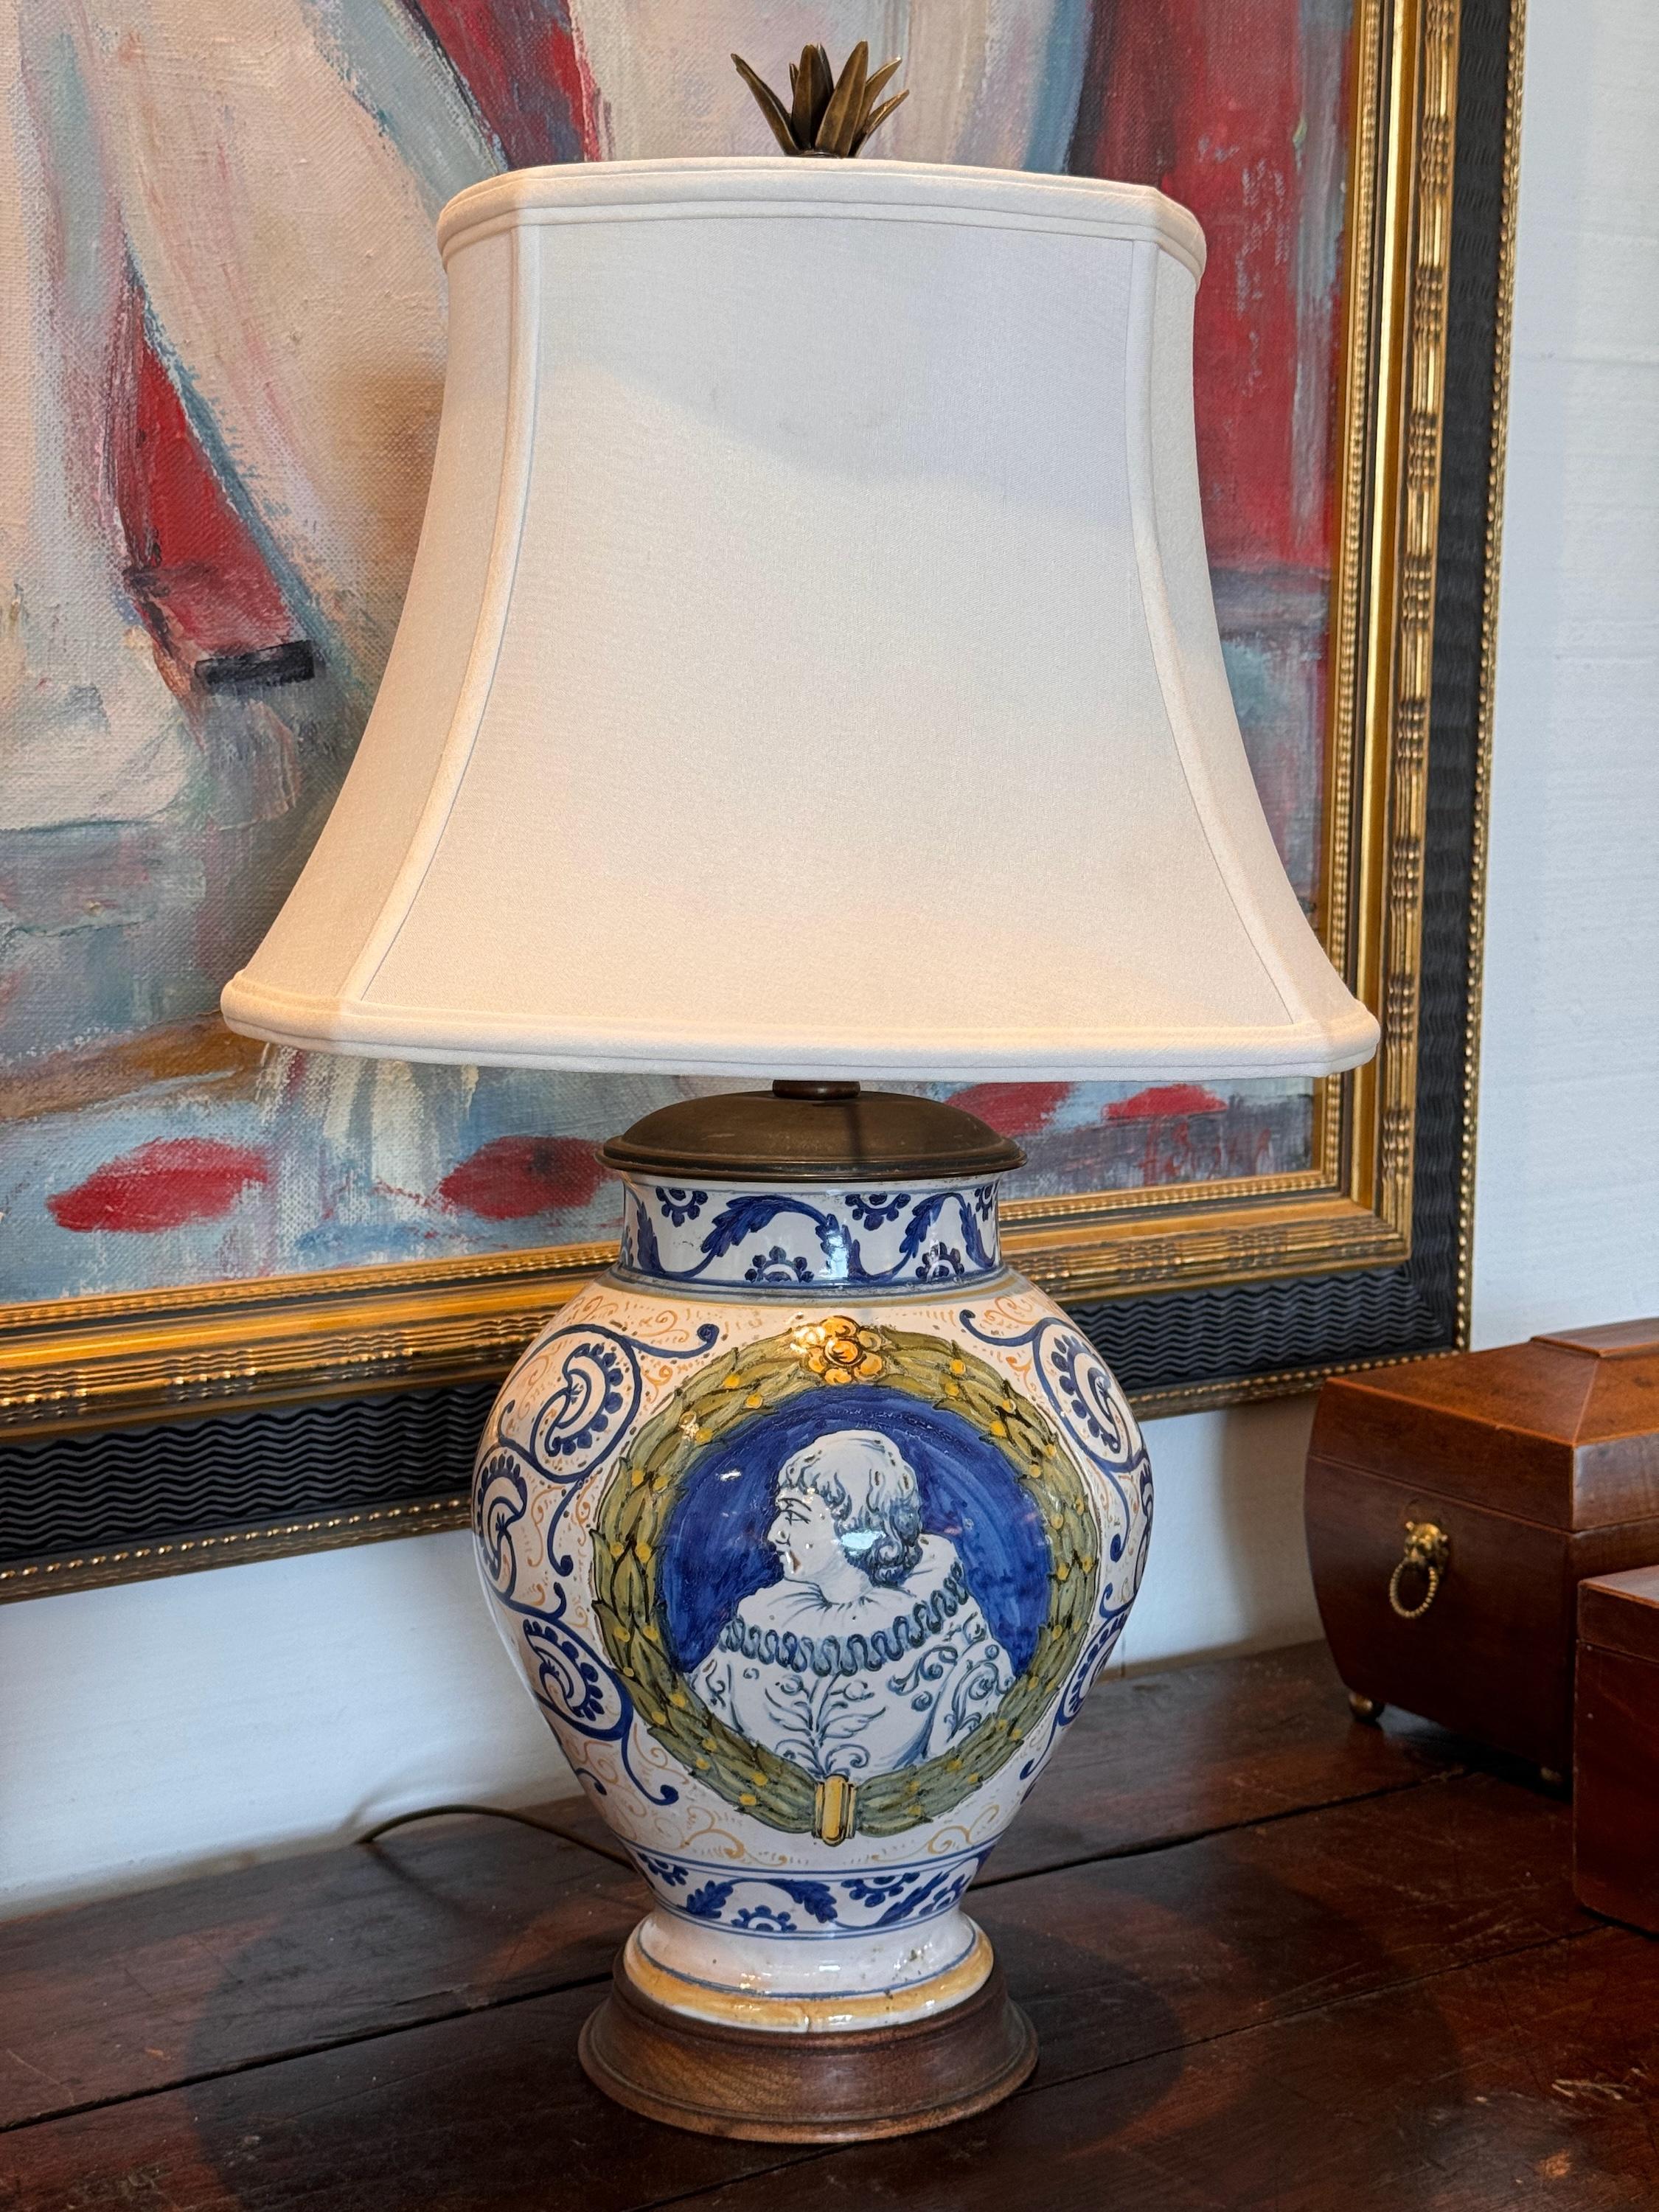 This is a beautiful lamp. It was crafted from an Italian jar.